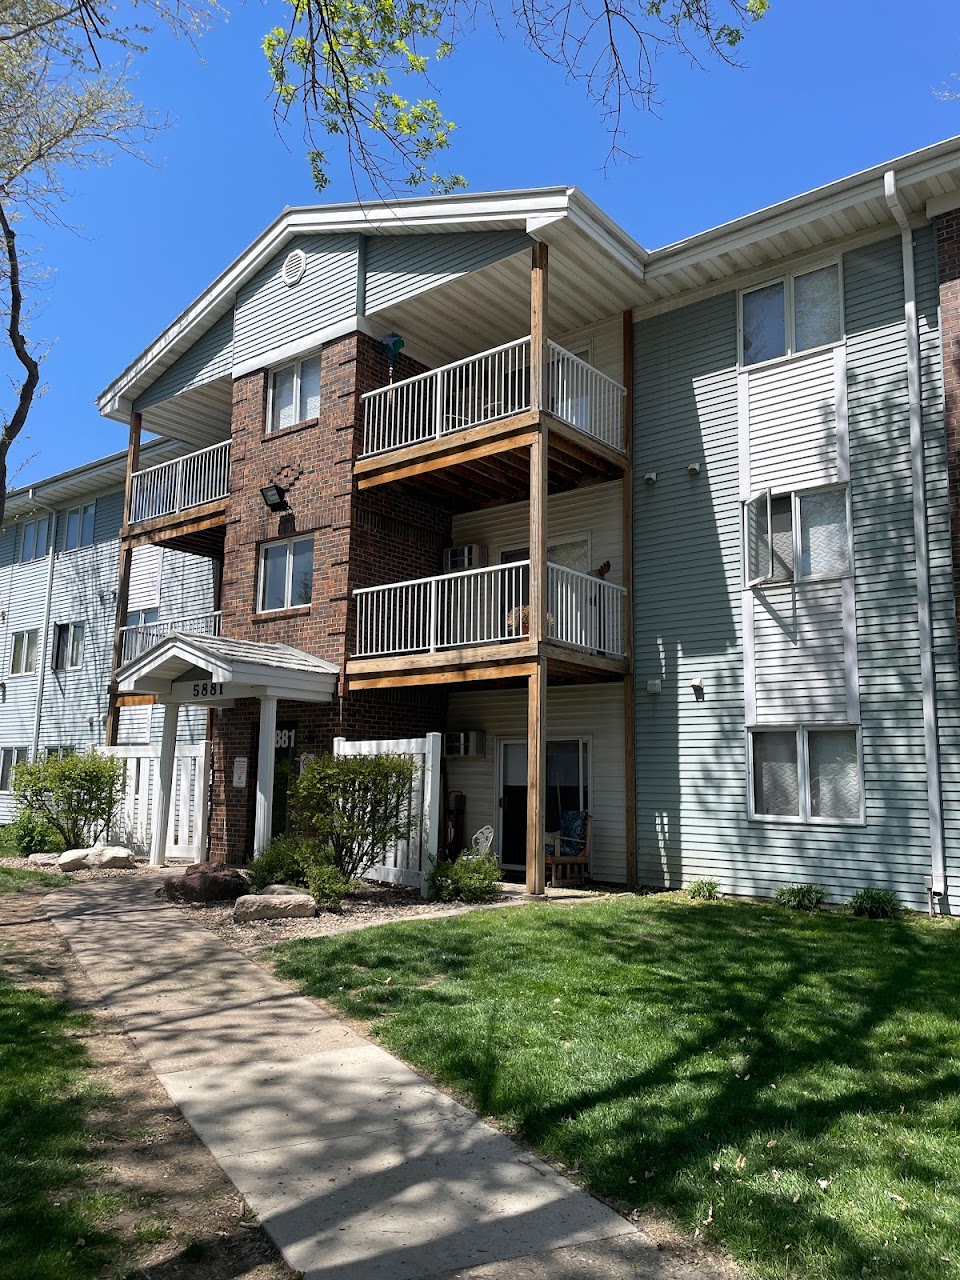 Photo of SUN PRAIRIE APTS VII. Affordable housing located at 6689 VISTA DR WEST DES MOINES, IA 50266